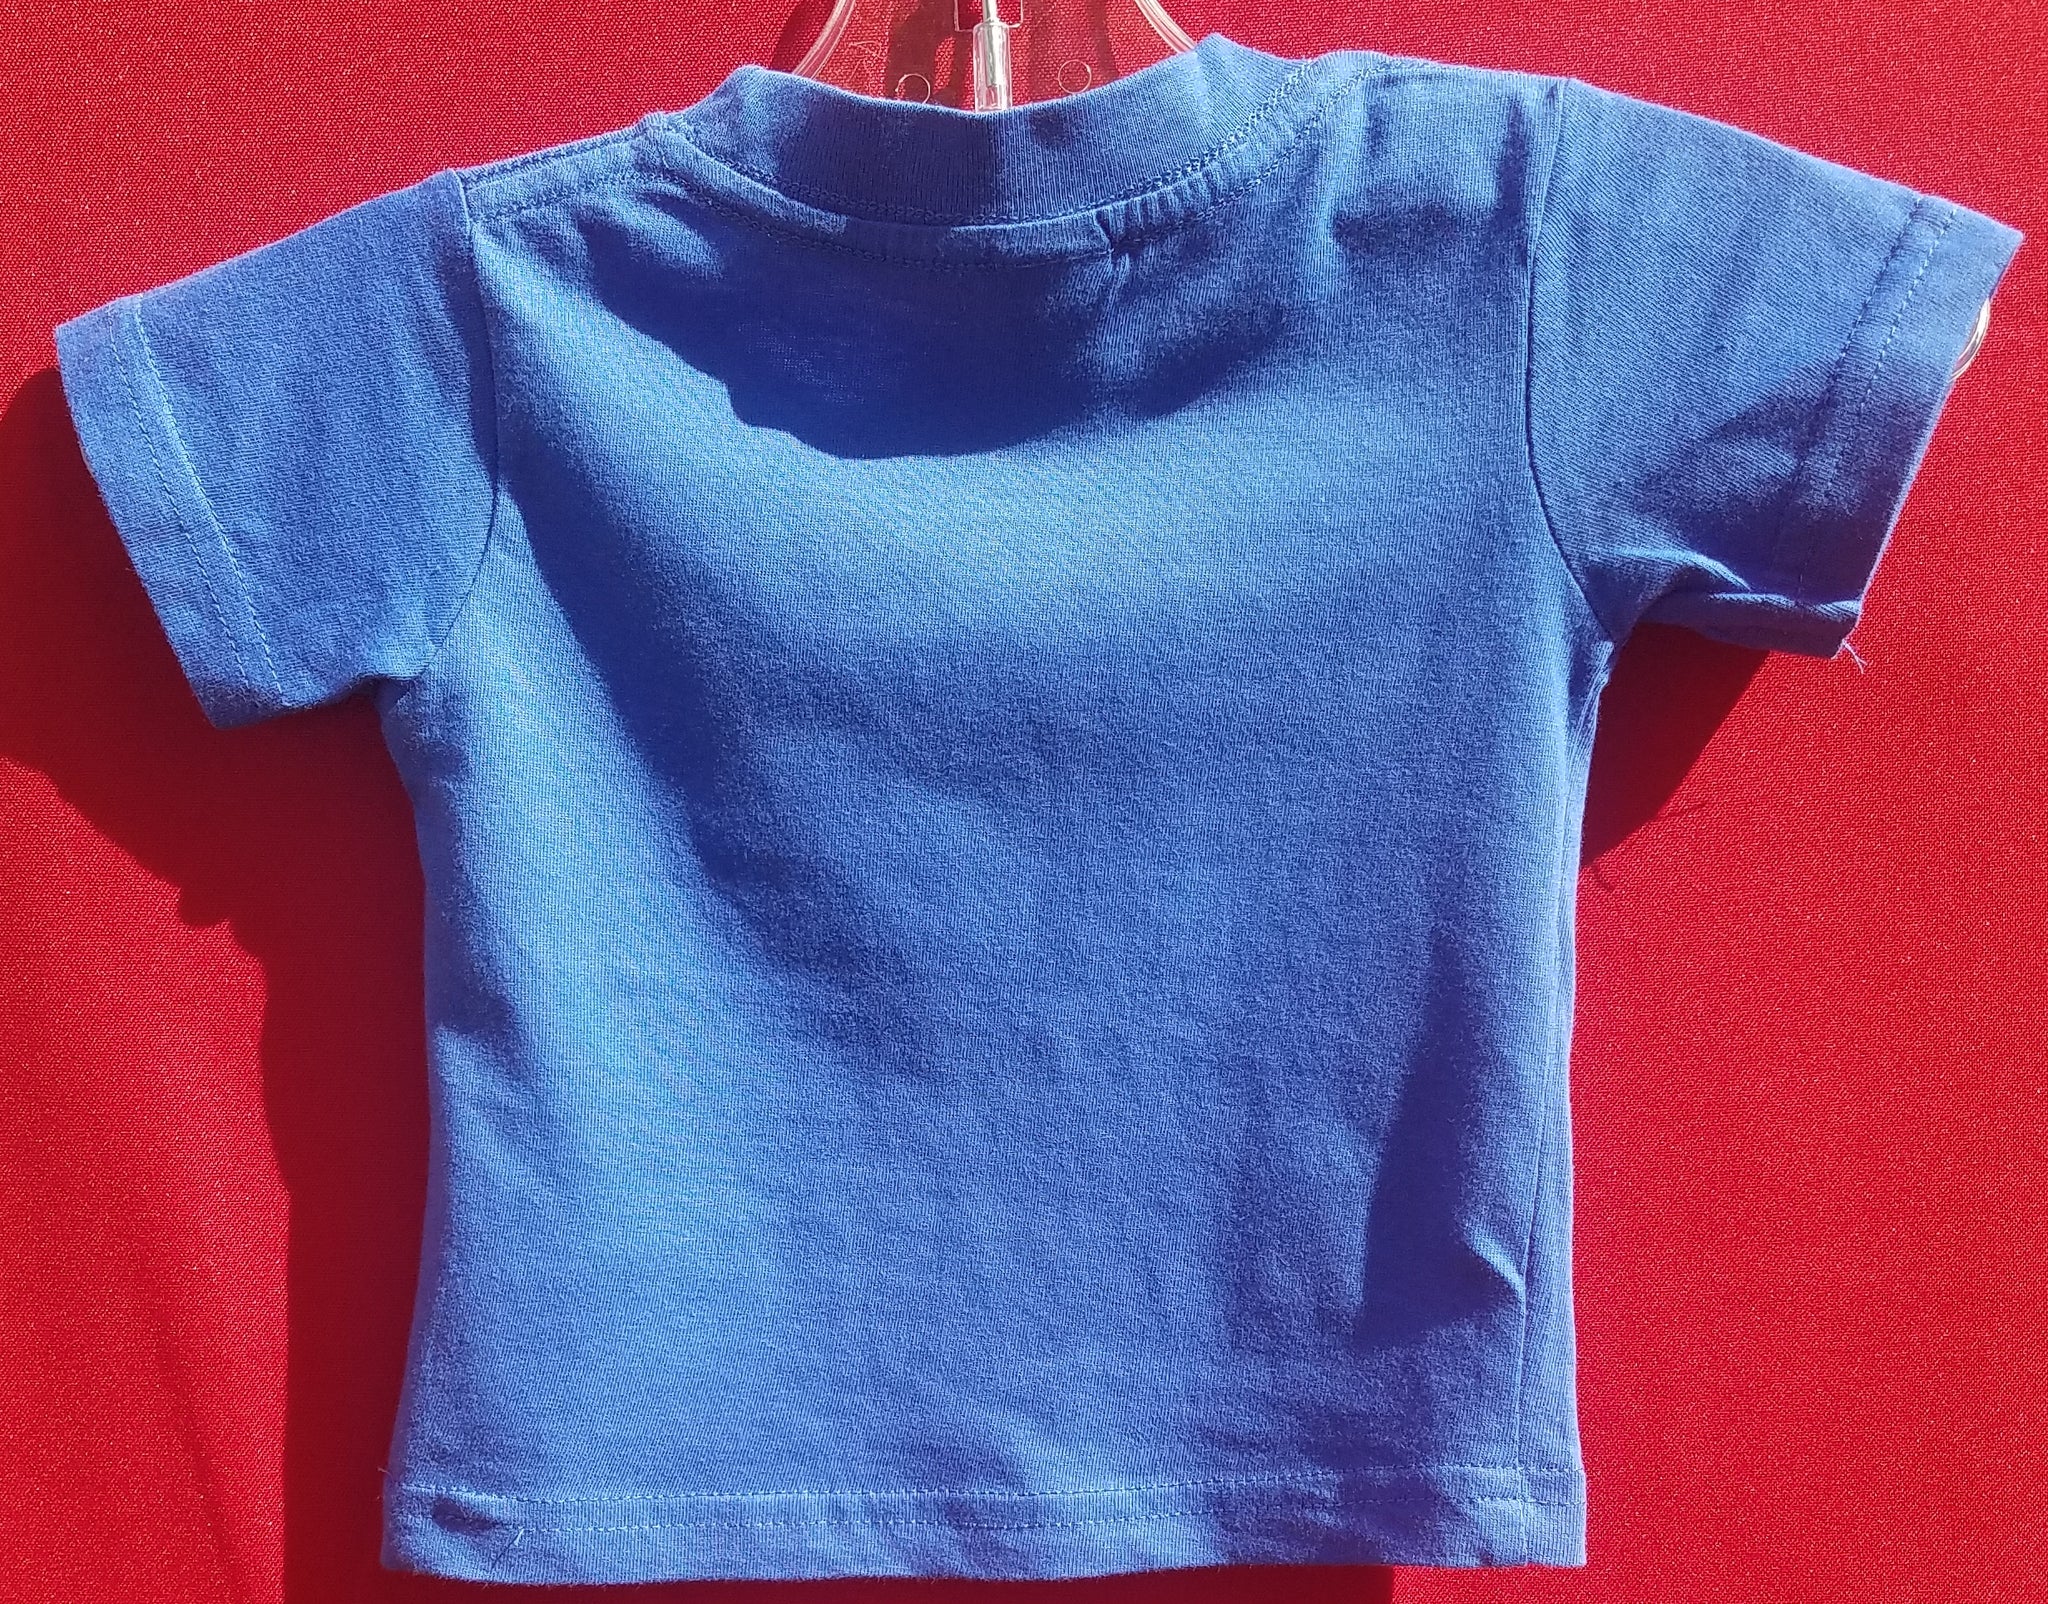 New Royal Blue Los Doyers Youth Silkscreen T-Shirt. Available From X –  J.B. Accessories05